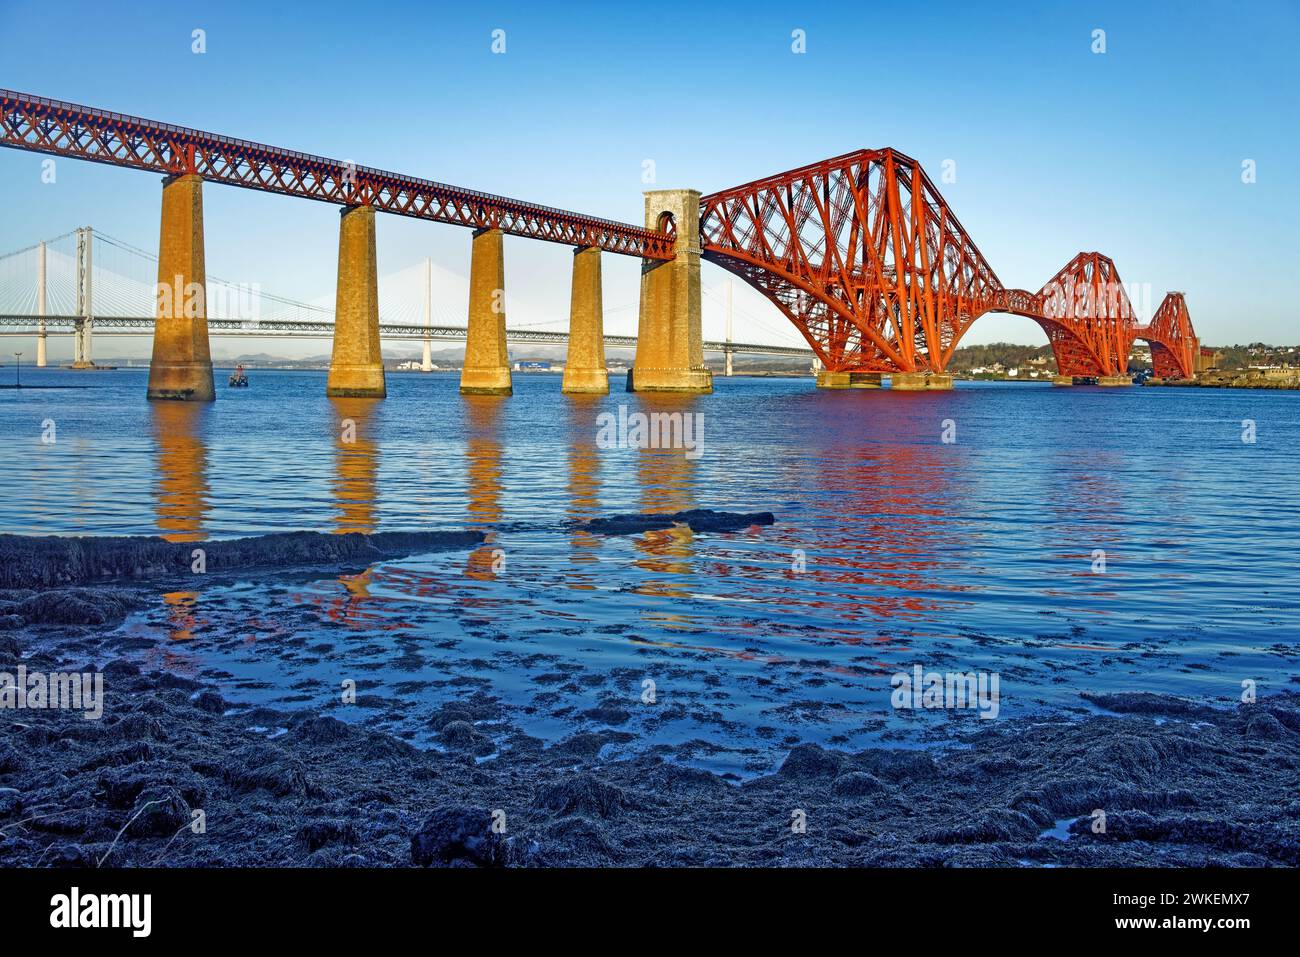 UK, Scotland, Forth Bridge crossing the Firth of Forth with Firth Road Bridge and Queensferry Crossing in the distance. Stock Photo